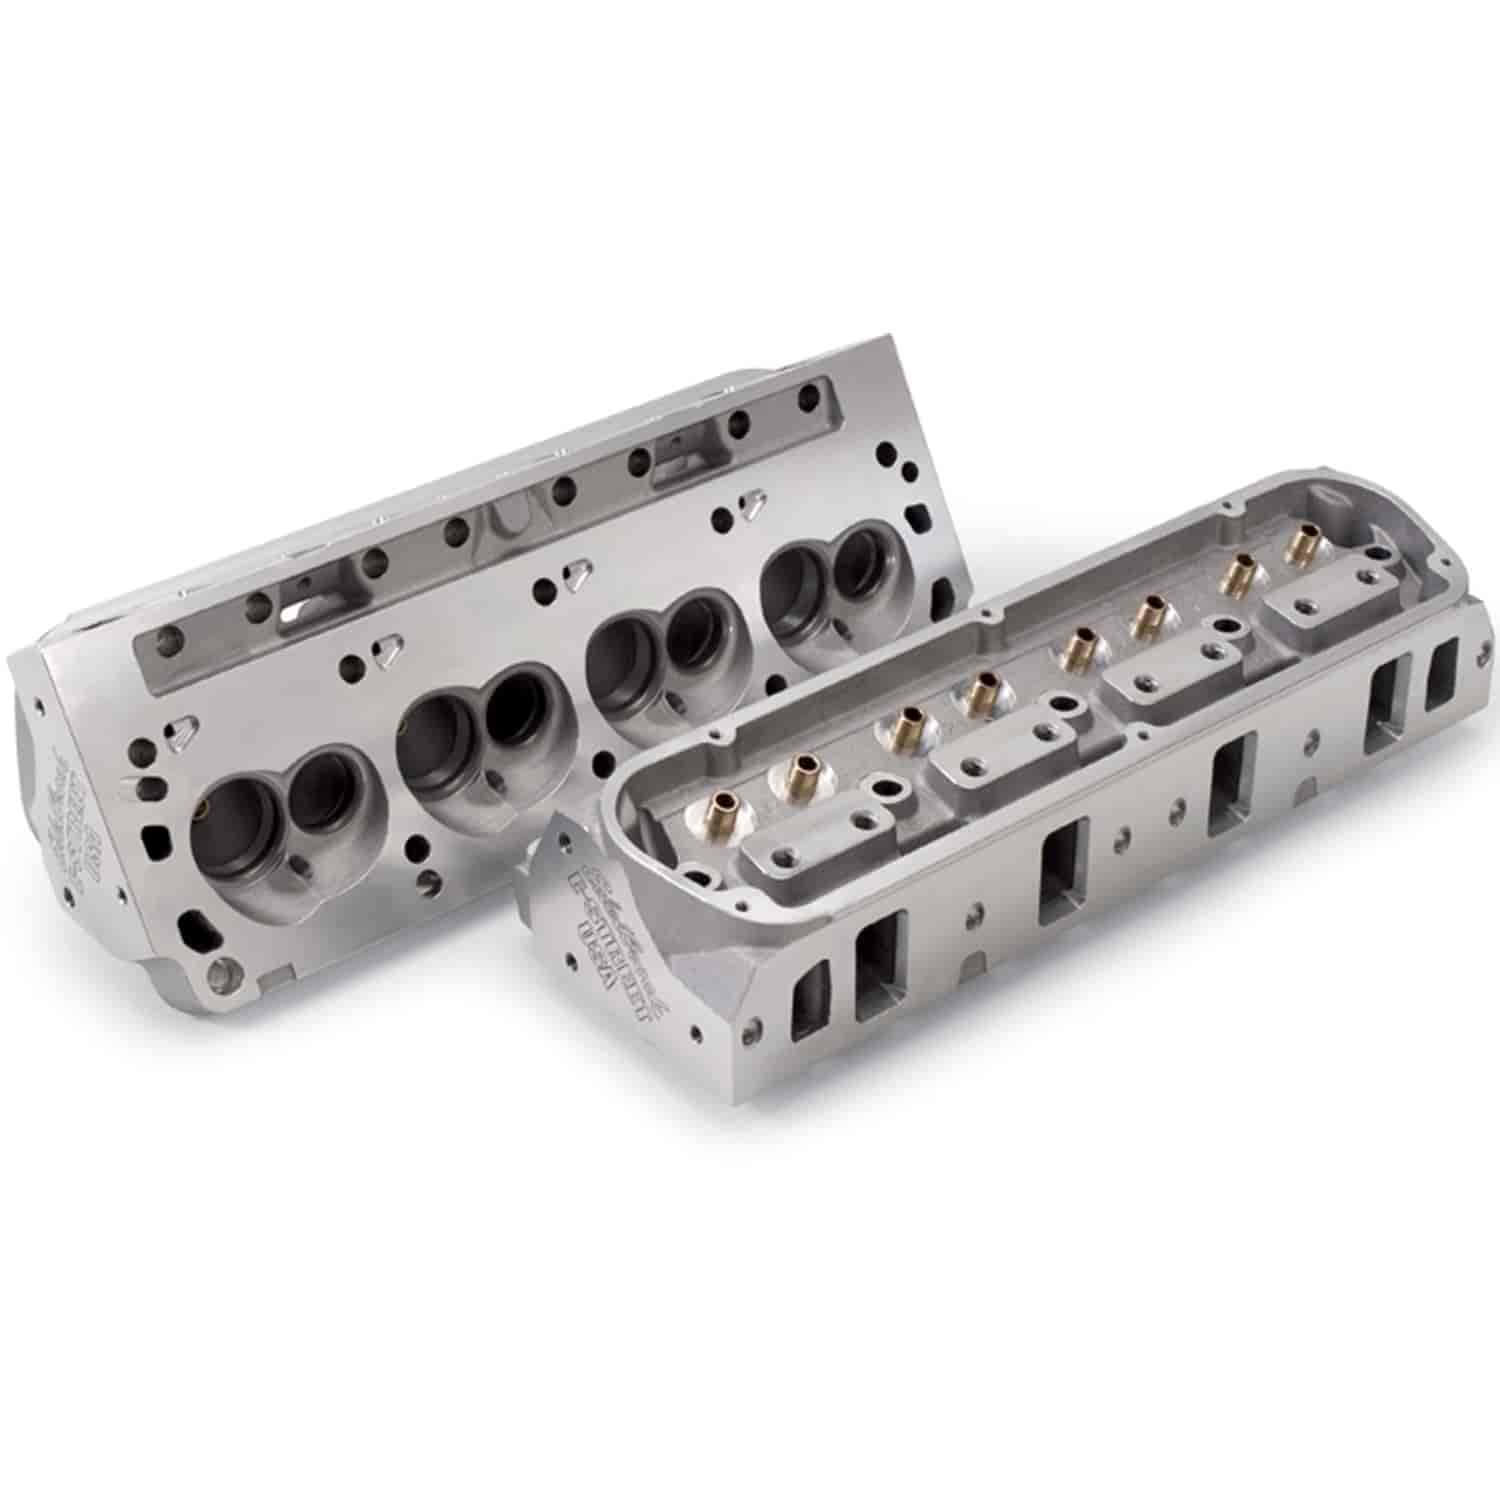 5020 E-Street Cylinder Heads for Small Block Ford